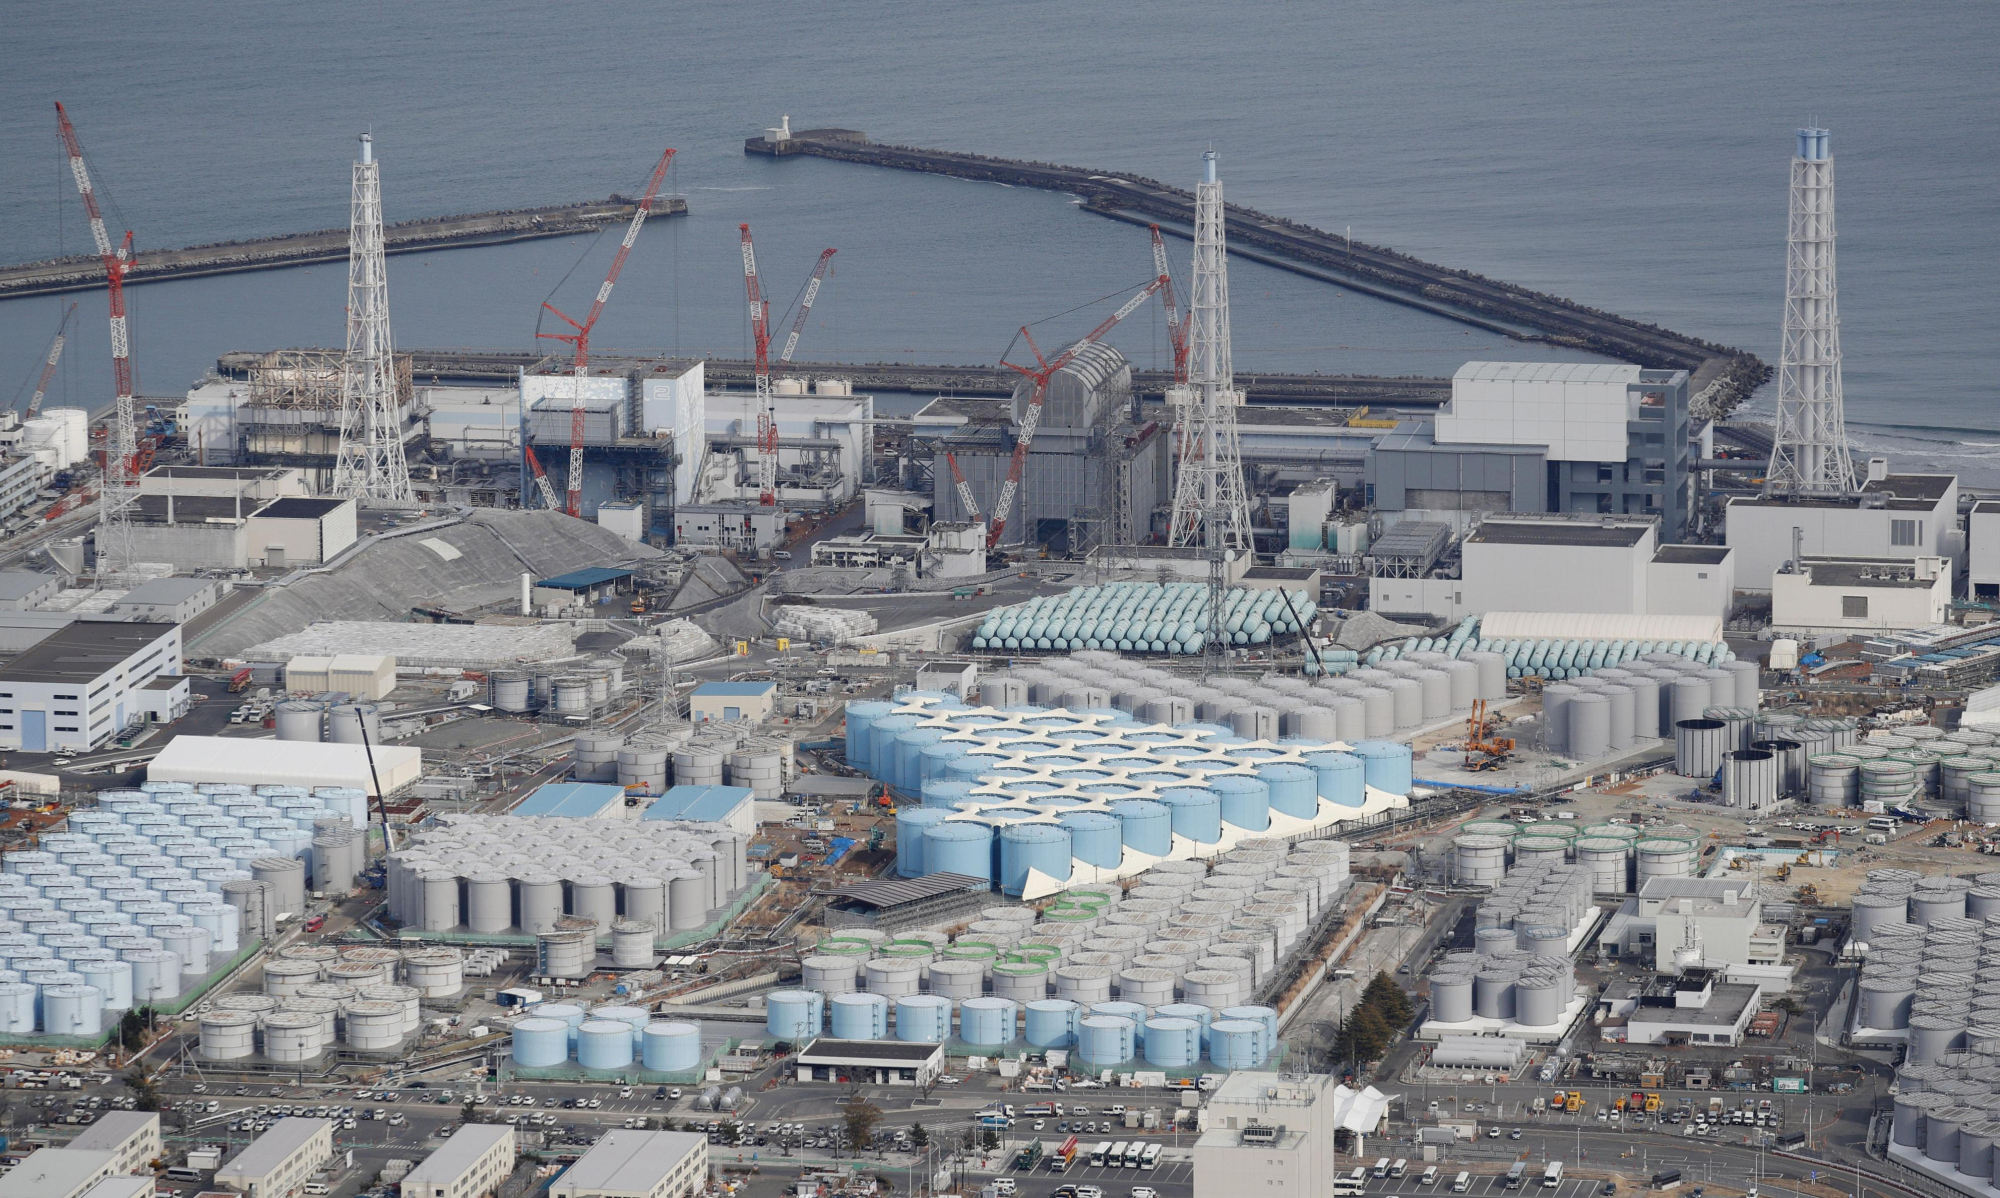 Hundreds of tanks can be seen holding filtered coolant water from the damaged Fukushima No. 1 nuclear power plant. Seven years after the meltdown crisis started, Tokyo Electric Power Company Holdings Inc. is struggling with an ever-increasing volume of radioactive water at the site. | KYODO